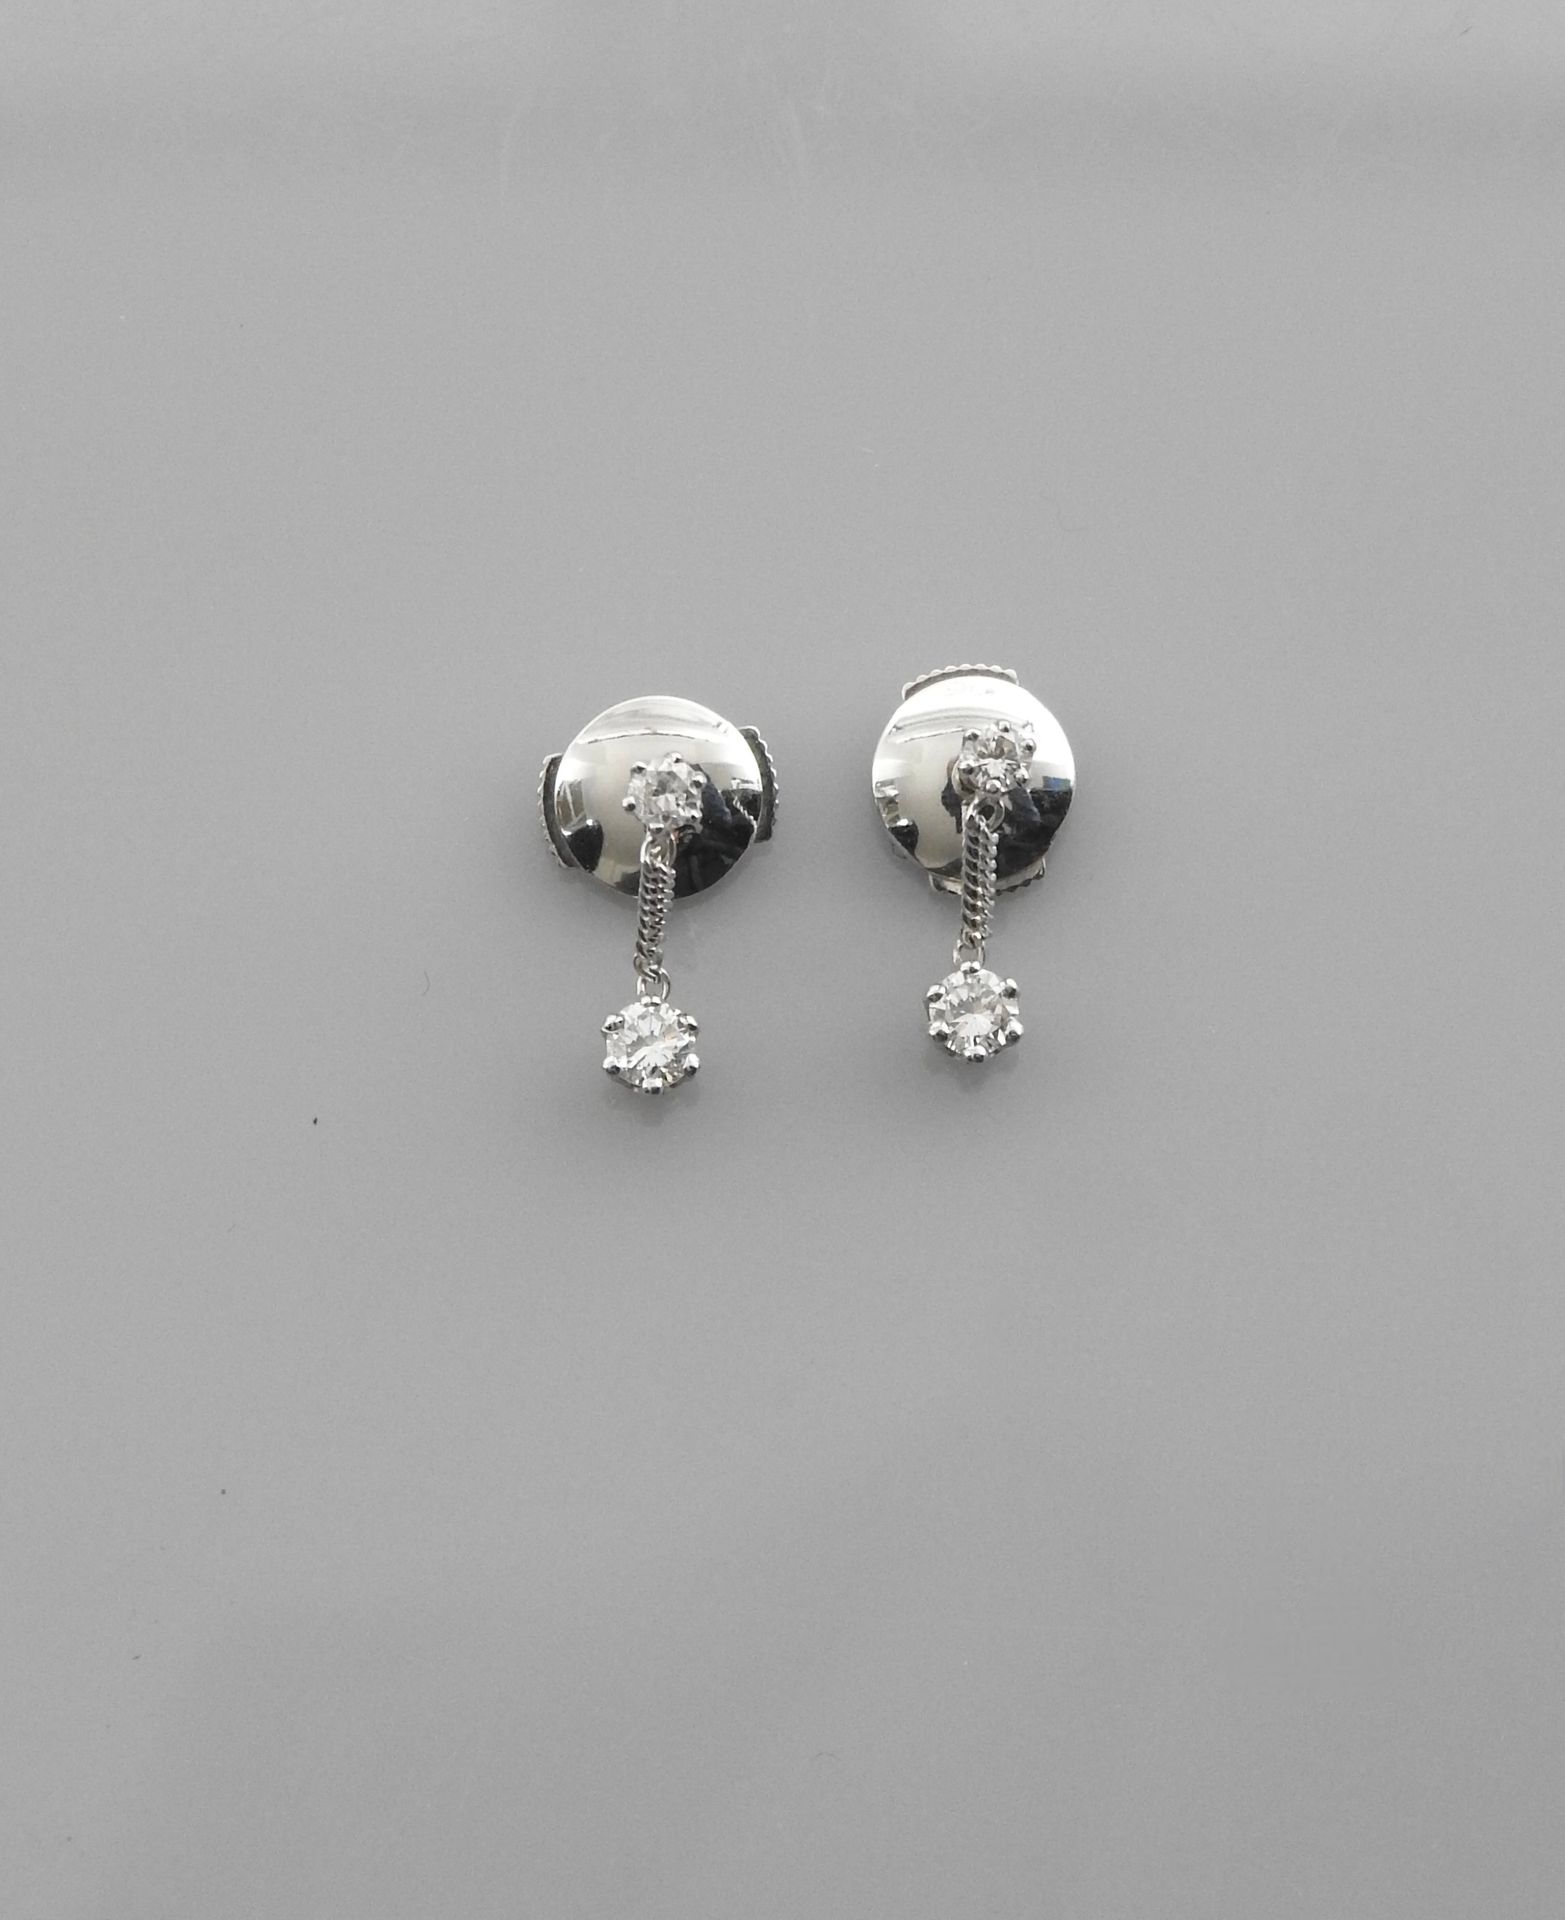 Null Earrings in white gold, 750 MM, each decorated with a diamond and a chain e&hellip;